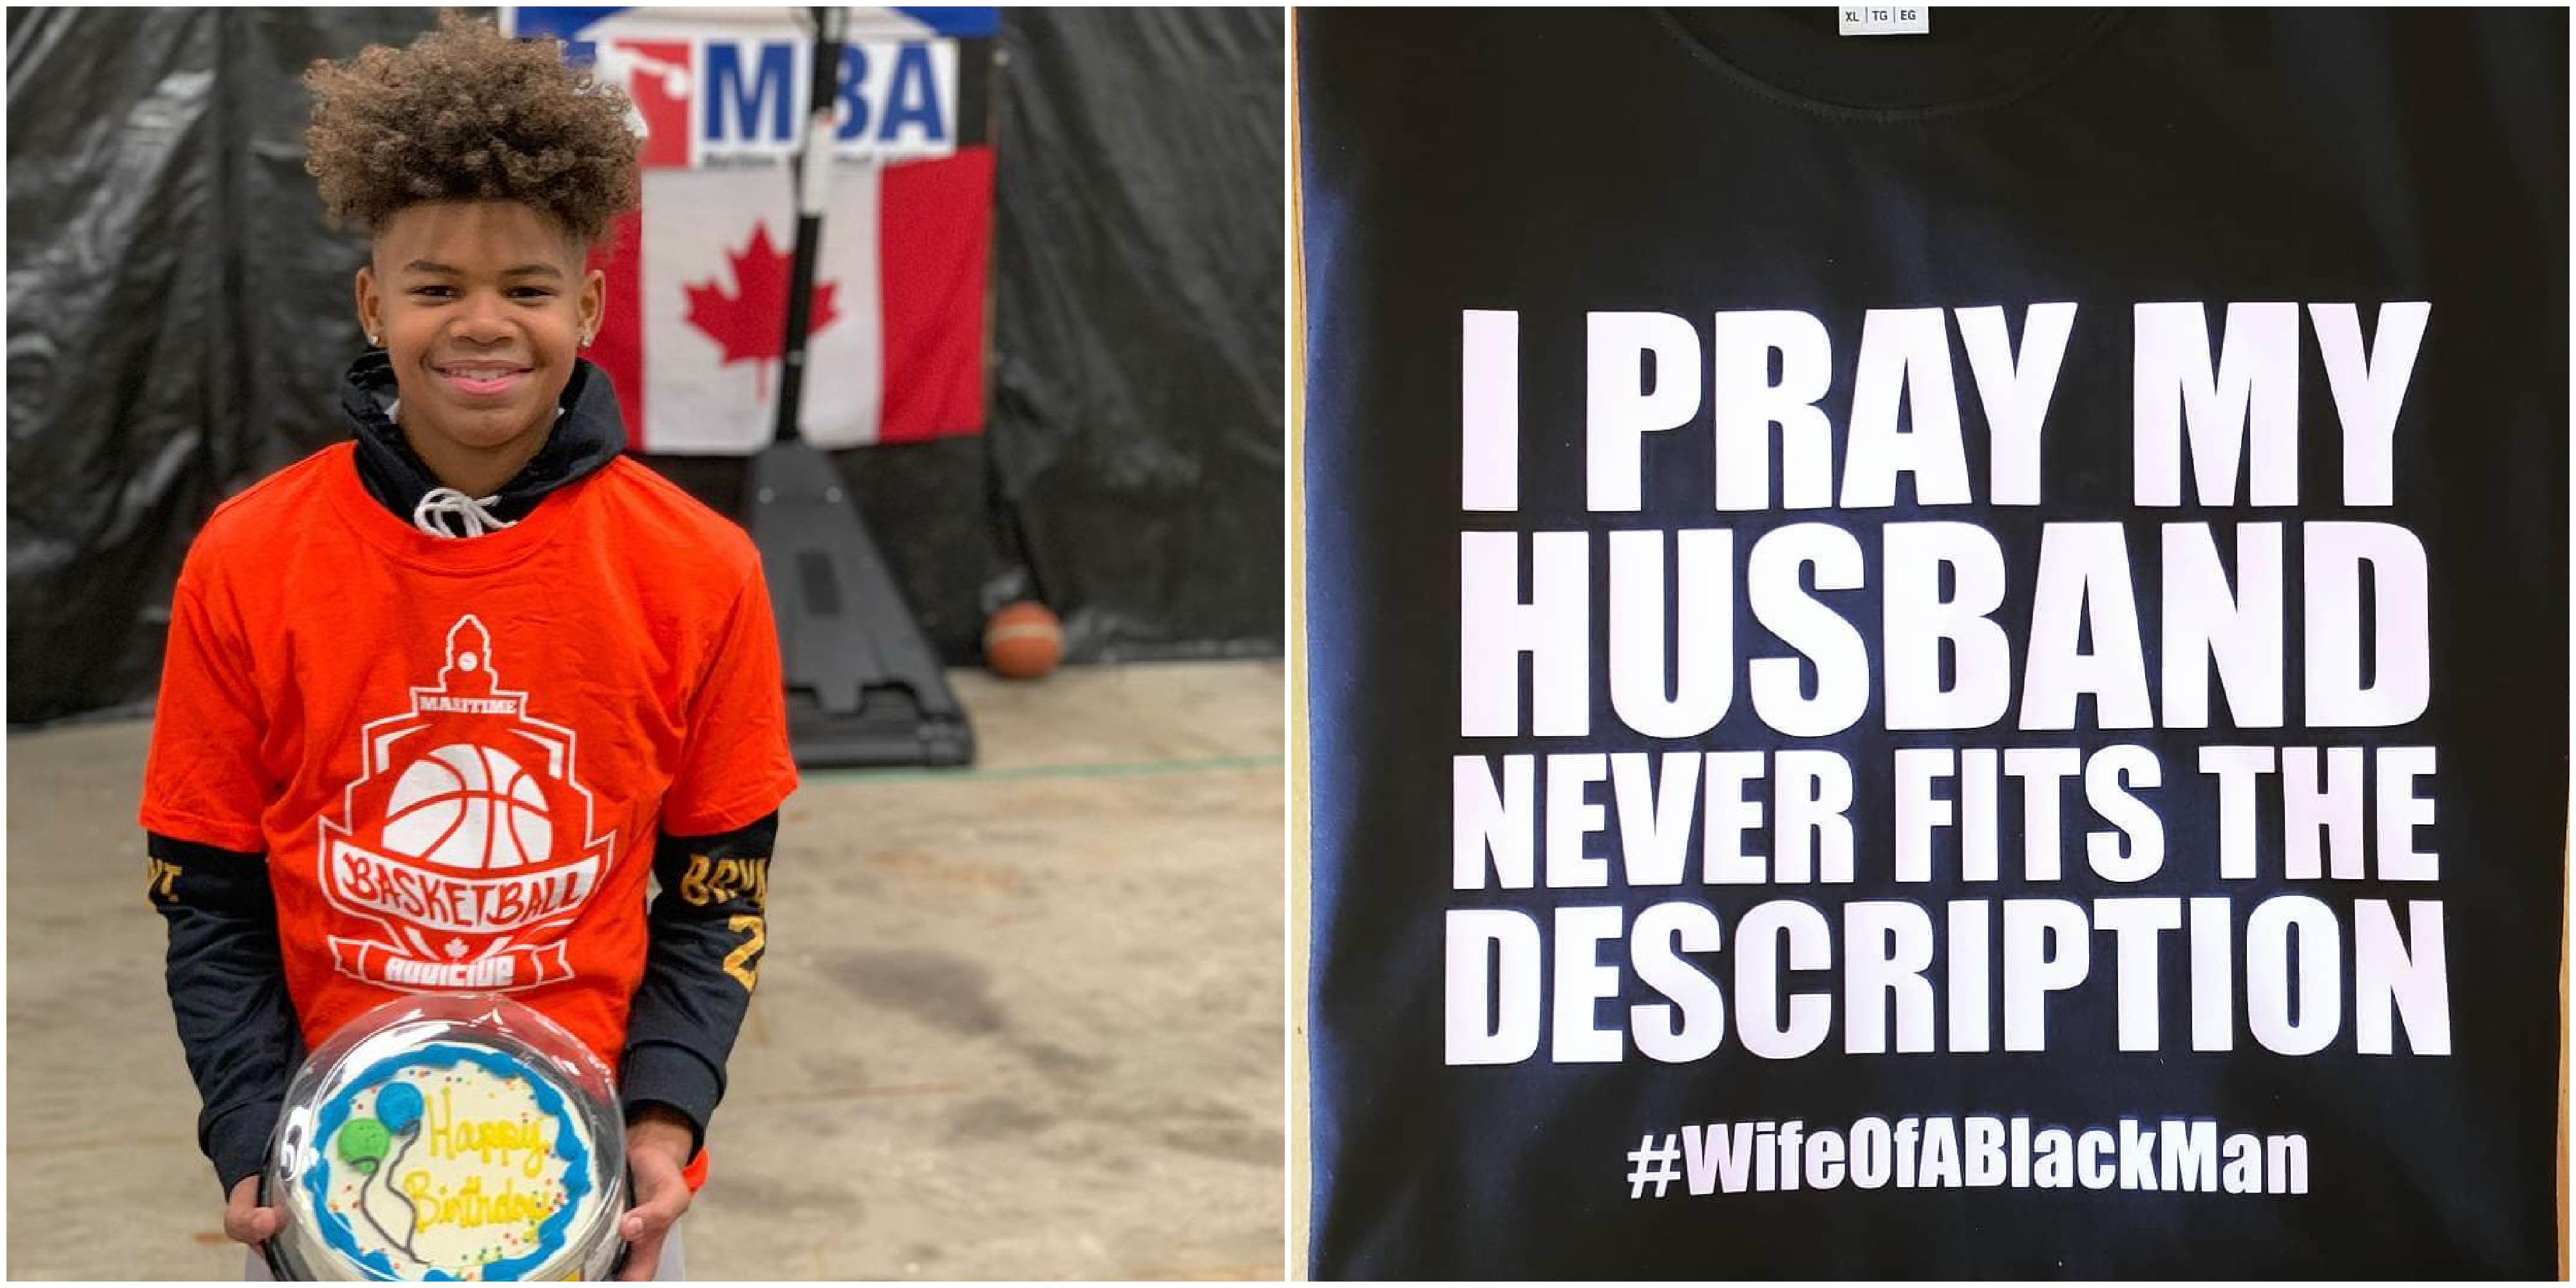 Left photo: Young black boy wearing an orange basketball tournament t-shirt designed by High Powered Cstoms.  Righ Photo: Black t-shirt with a white print that says: "I PRAY MY HUSBAND NEVER MATCHES THE DESCRIPTION #WifeOfABlackMan"